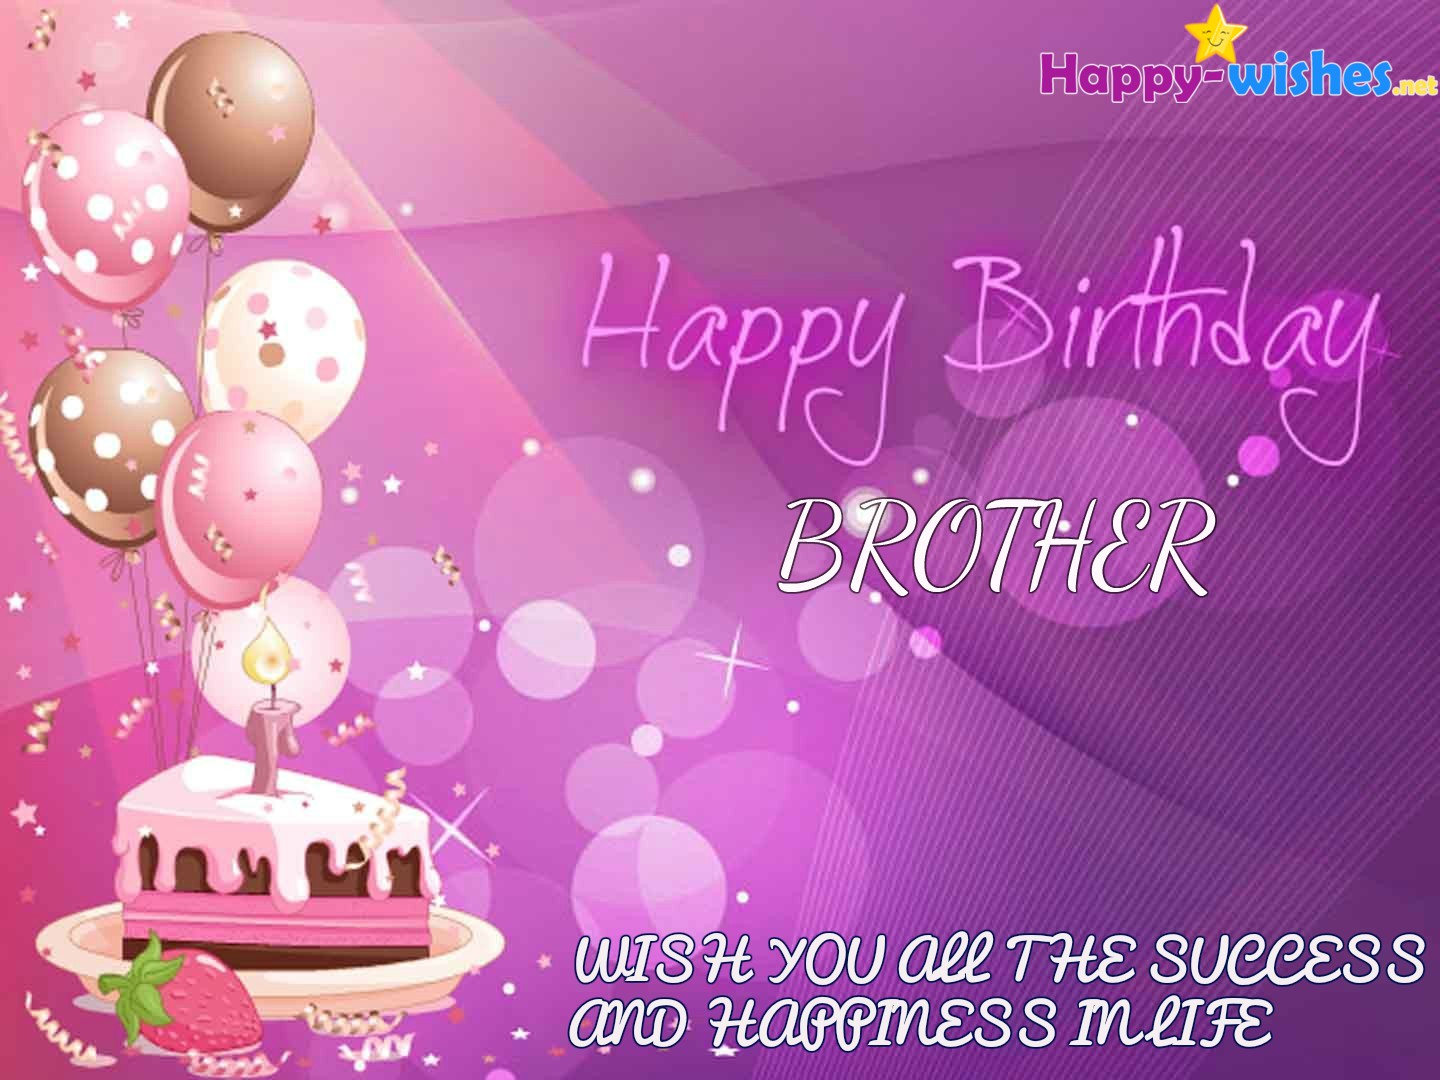 Happy-birthday-images-for -brother